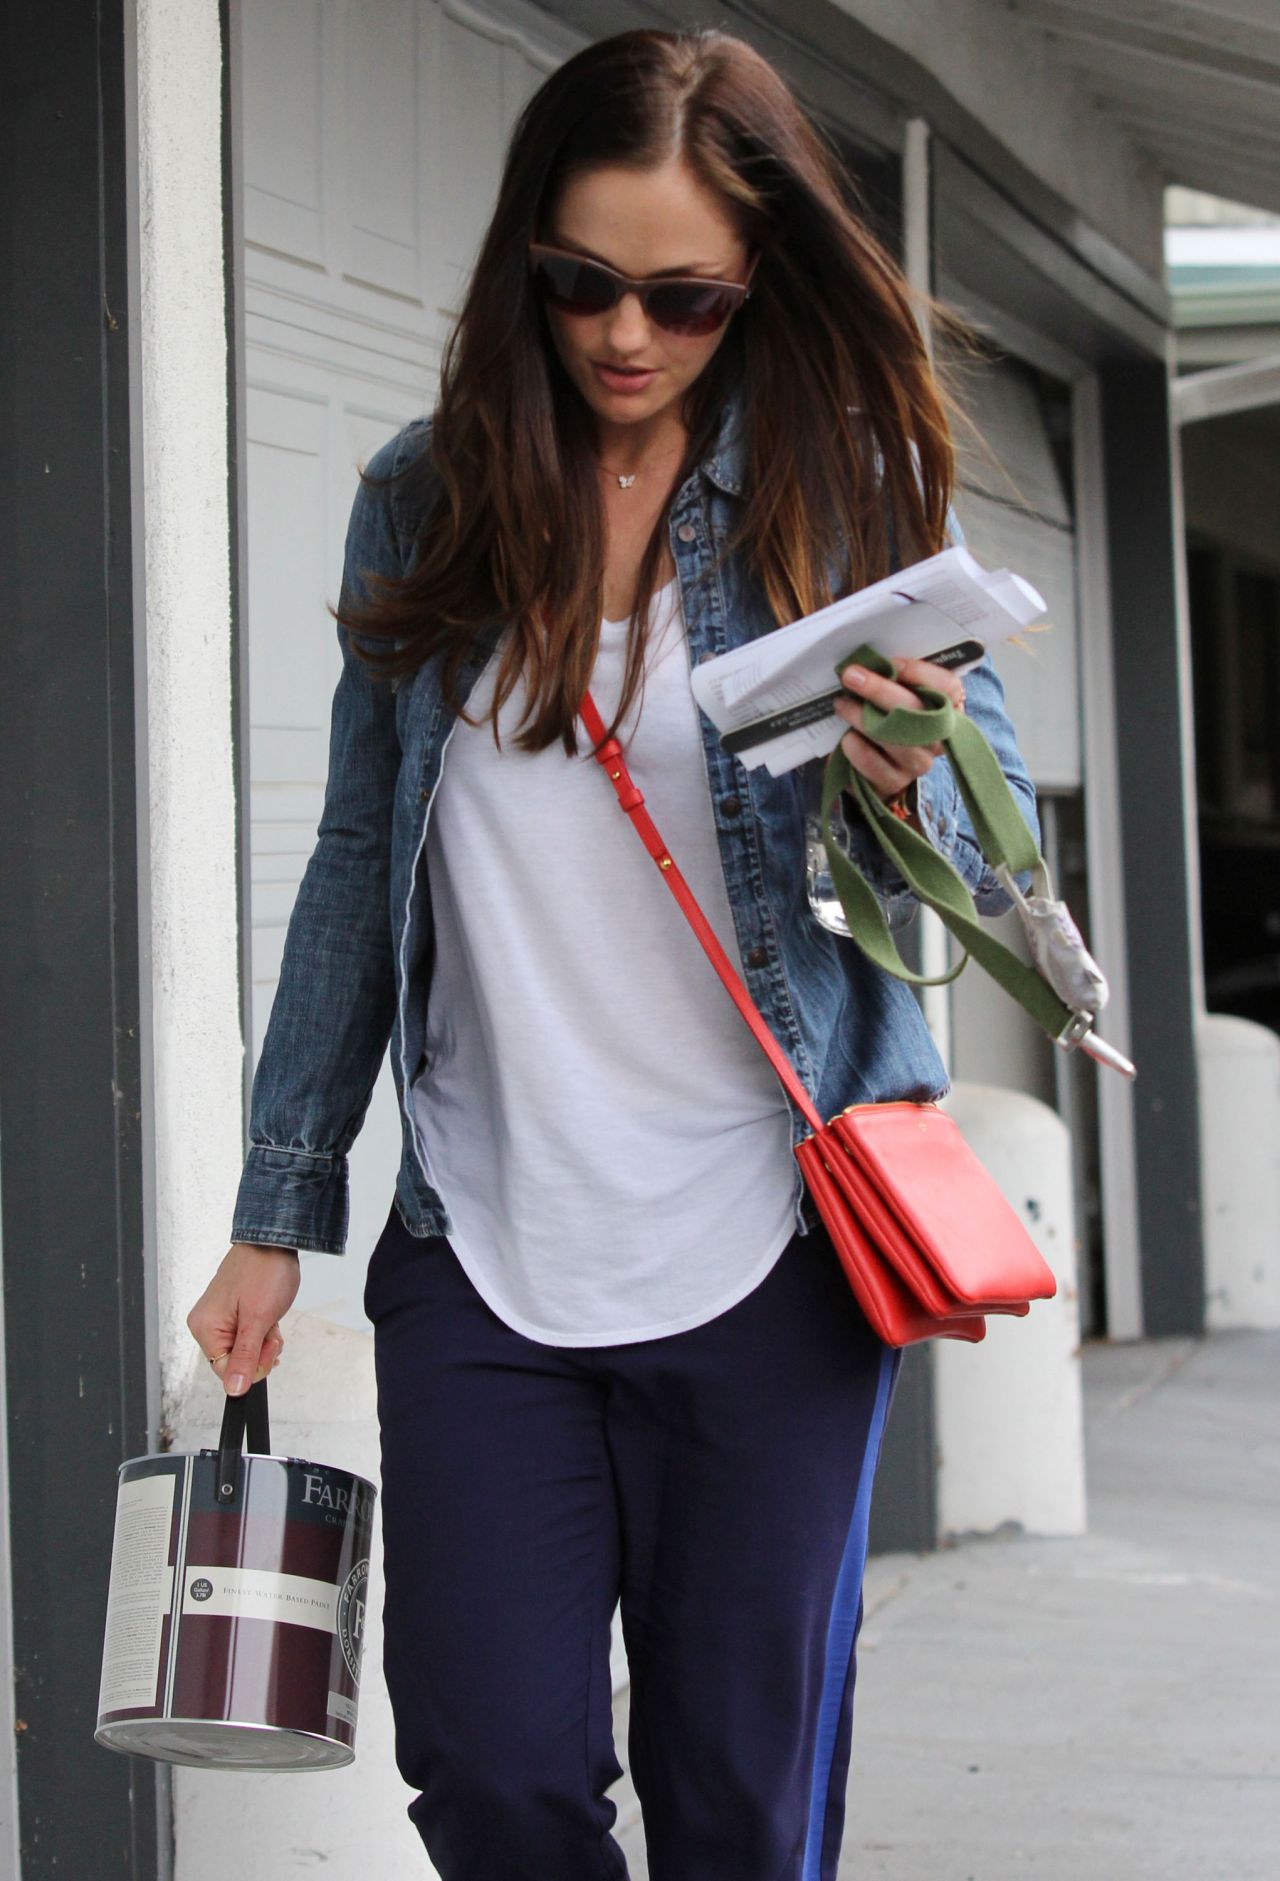 Minka Kelly Casual Style - Out in Los Angeles - January 2014